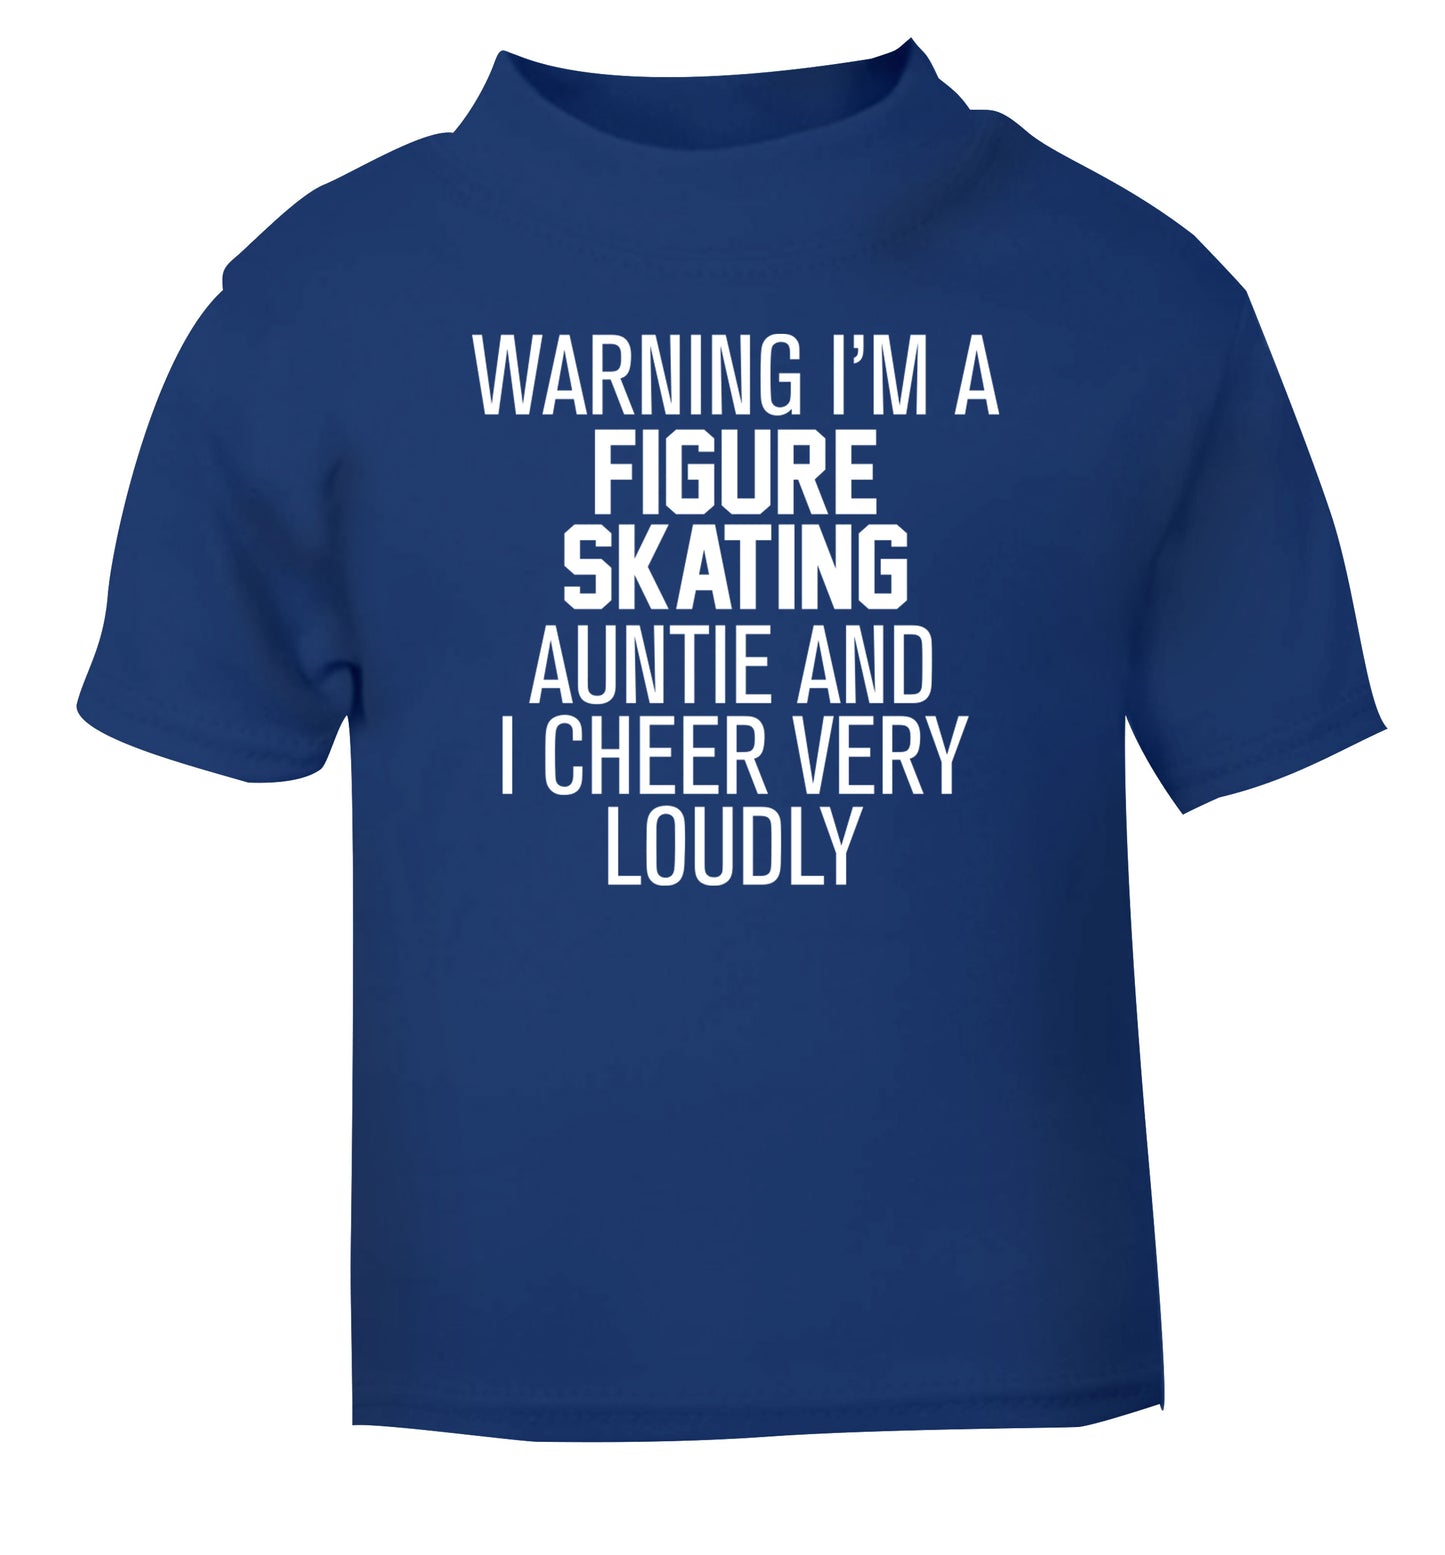 Warning I'm a figure skating auntie and I cheer very loudly blue Baby Toddler Tshirt 2 Years